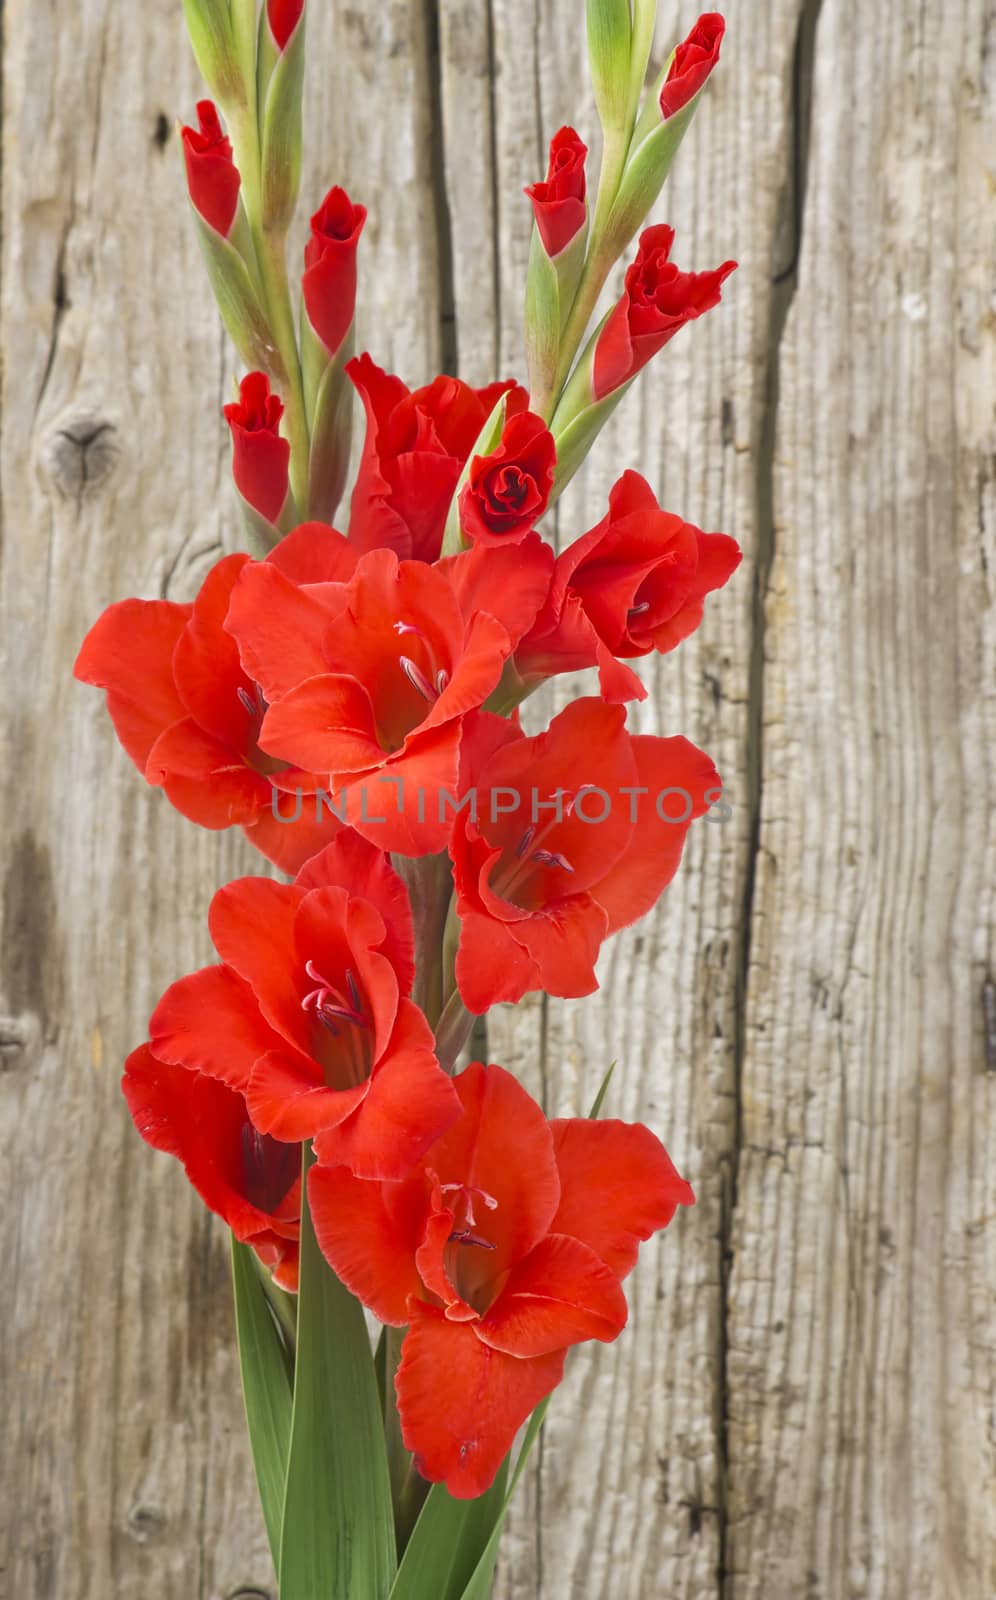 red gladiolus flowers on wooden background